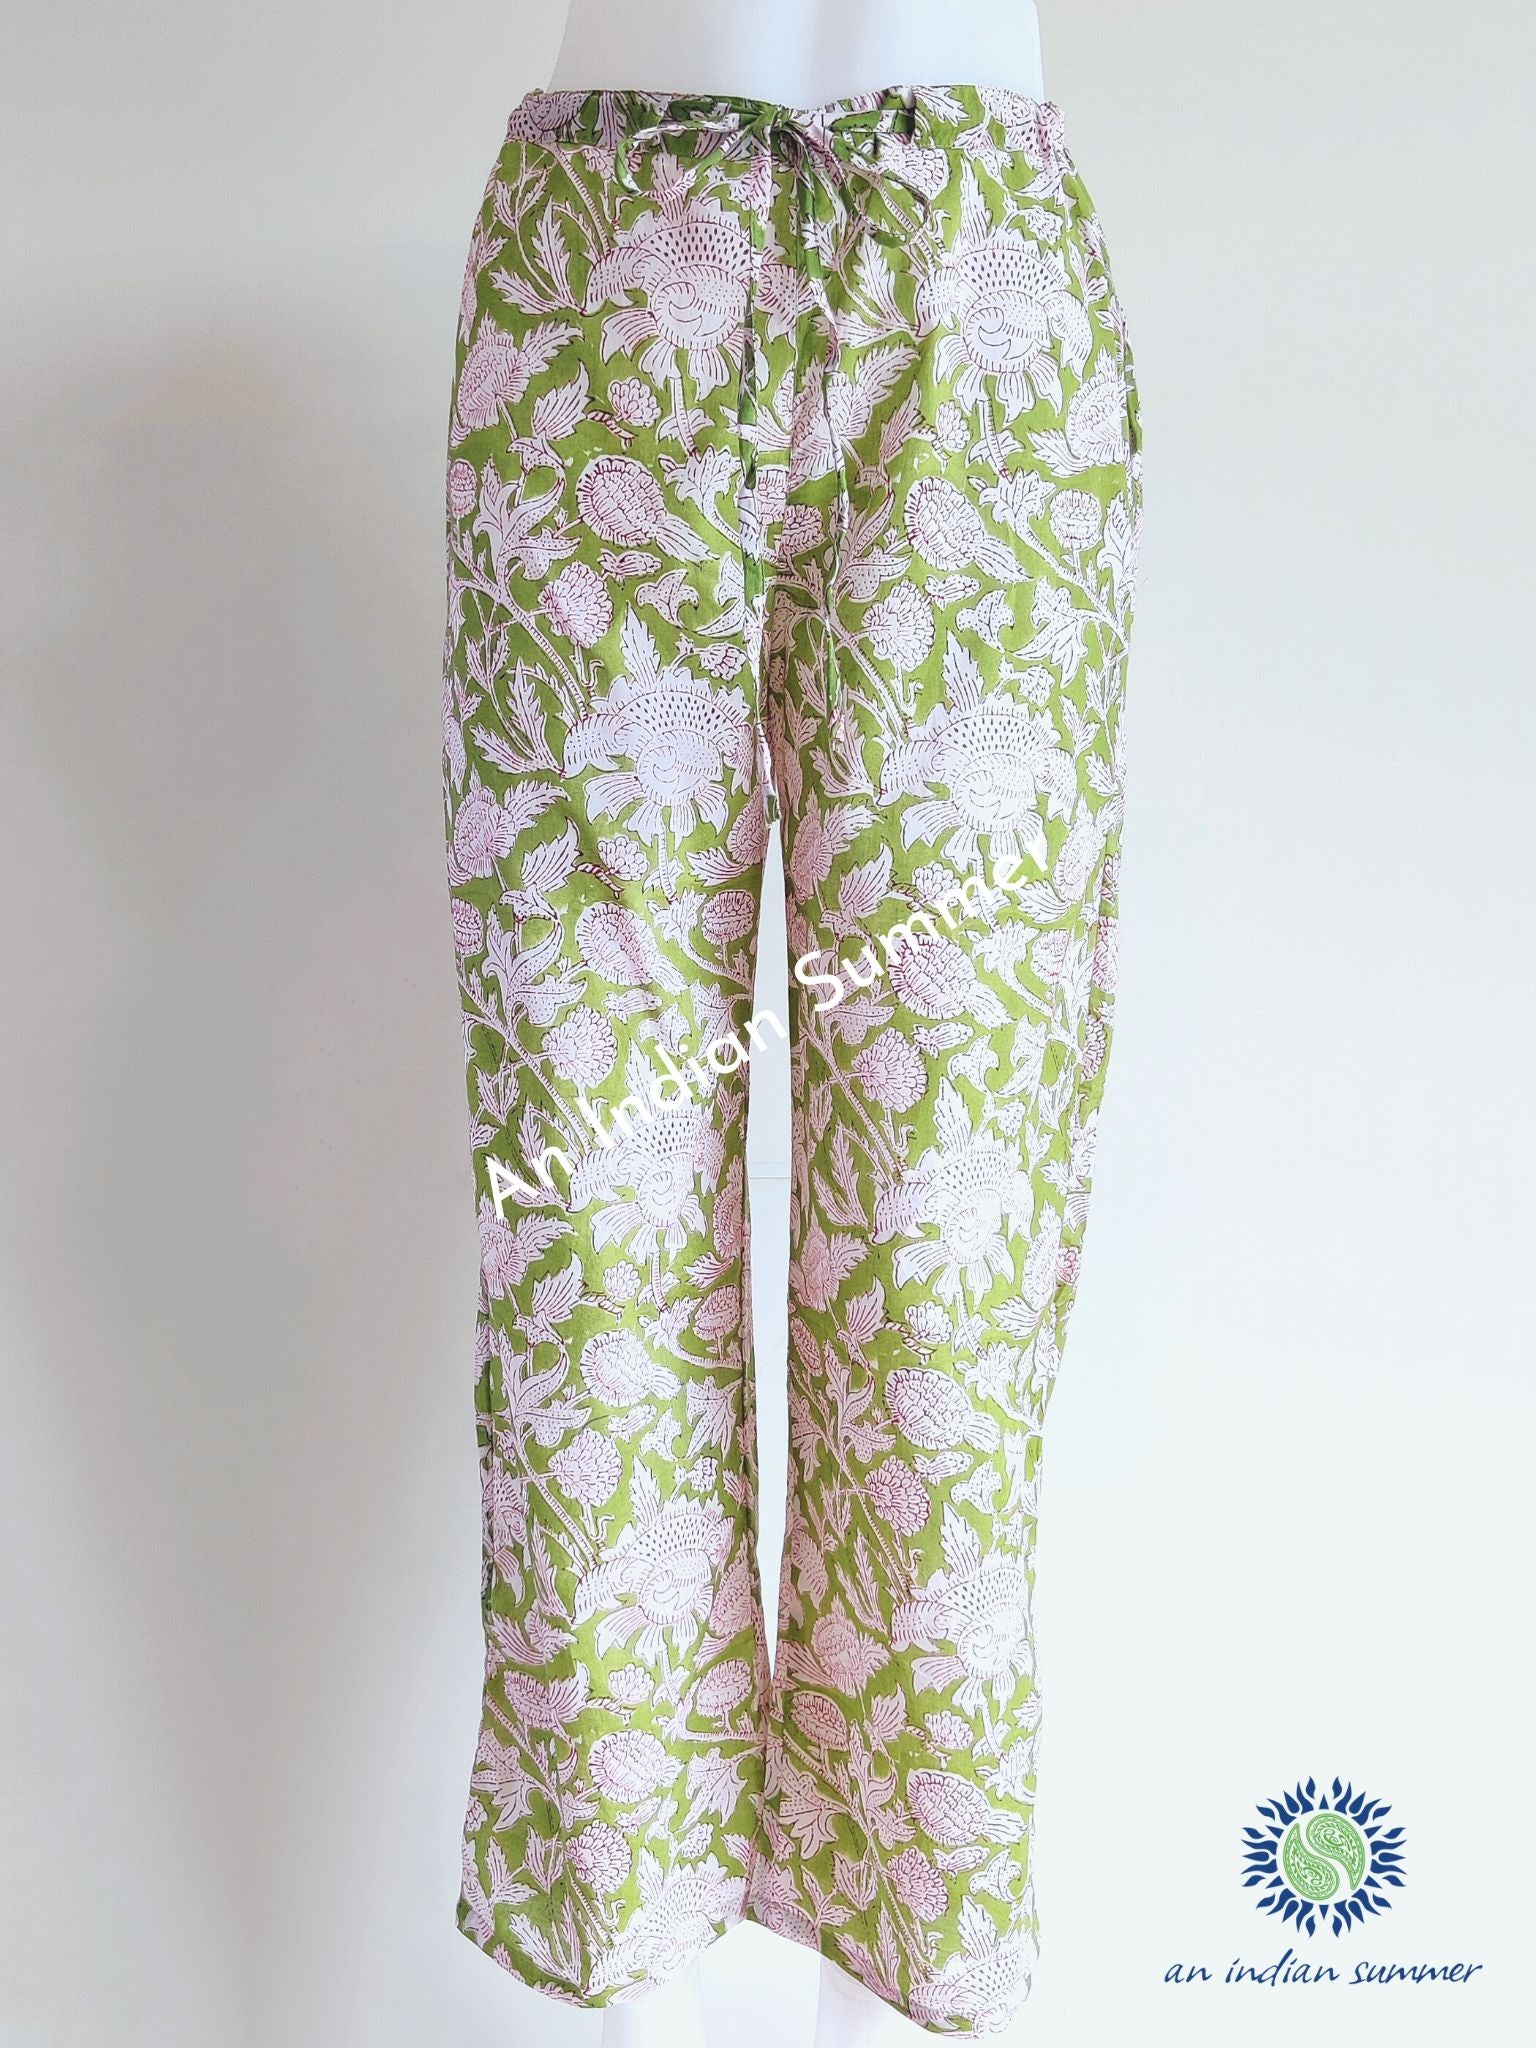 Suraj ethenic pure strachable cotton trousers n pents in emblished ruffle  lace on bottom side in beautiful solid colour for Indian women and girls